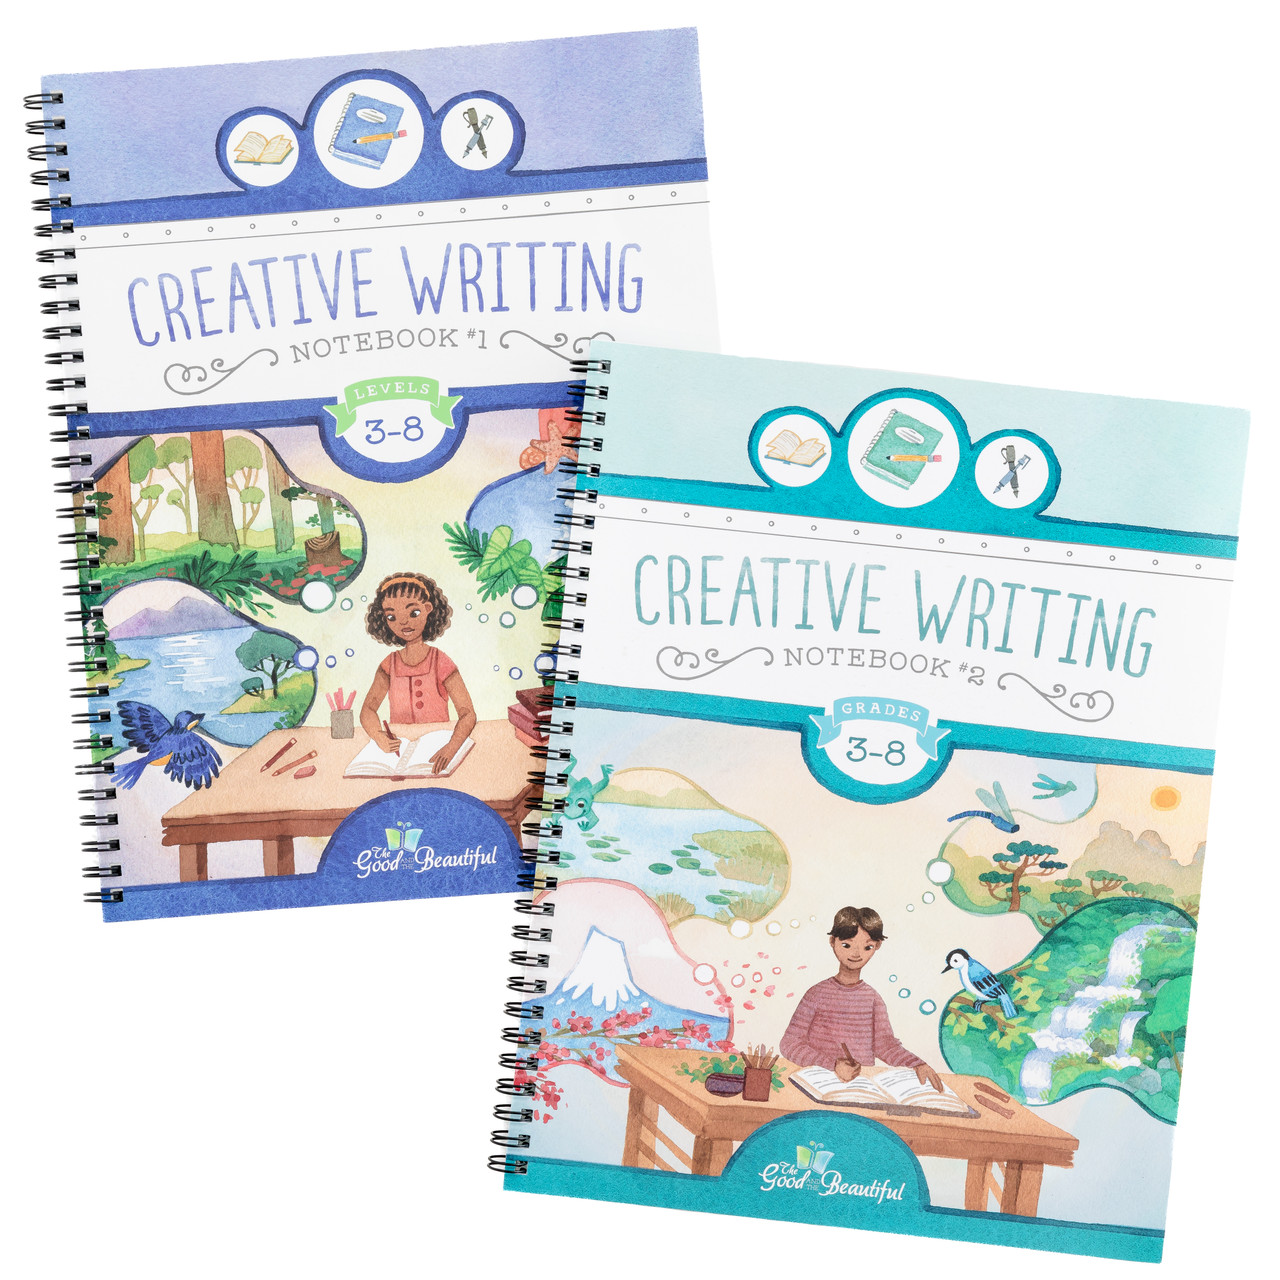 Creative Writing Notebooks - The Good and the Beautiful